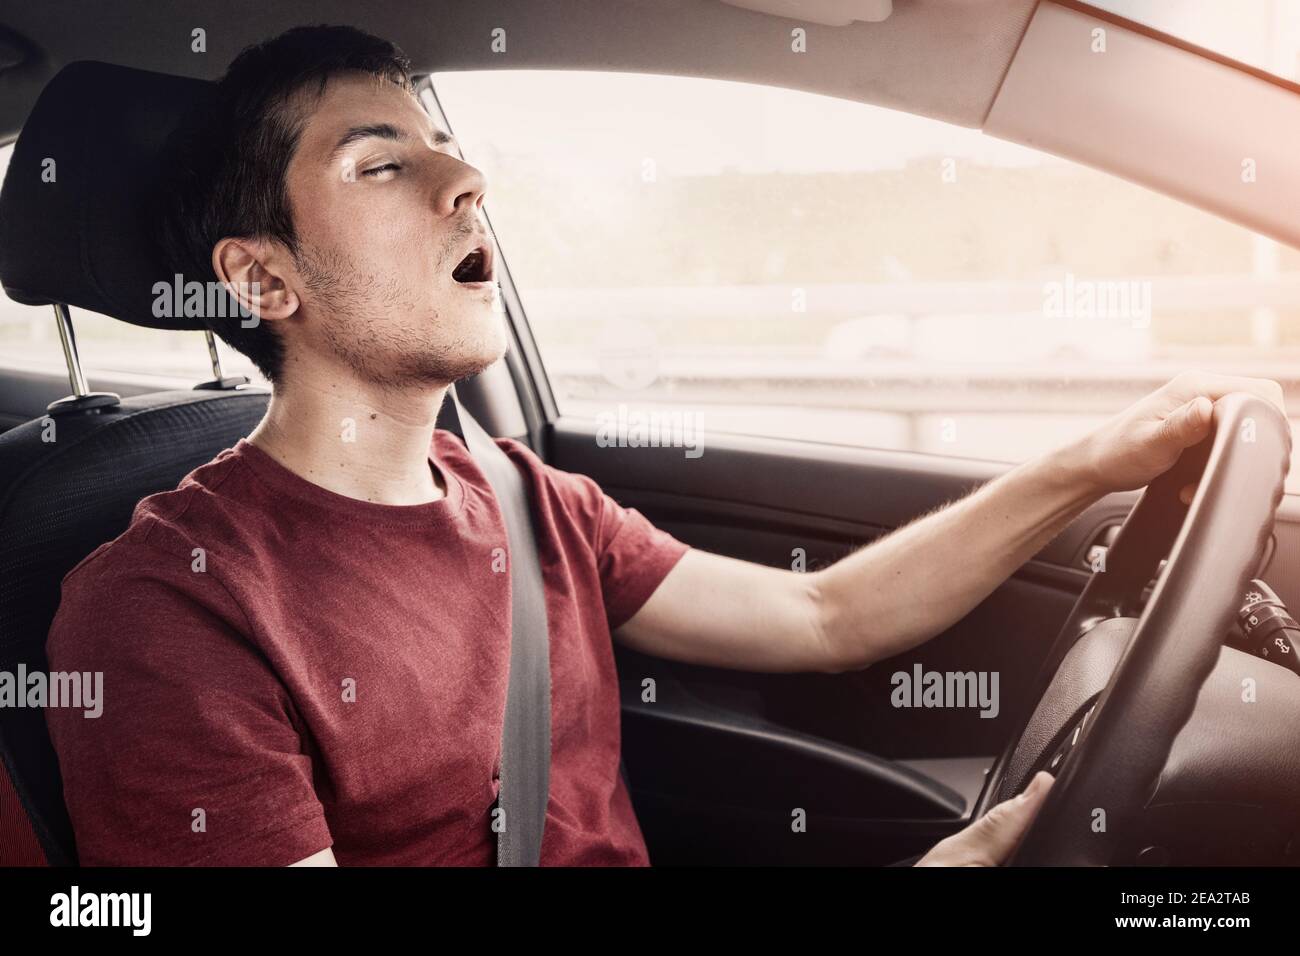 man driving the car fell asleep and does not control the road situation. Drugged with alcohol or insomnia concept. Car crashes and deaths Stock Photo